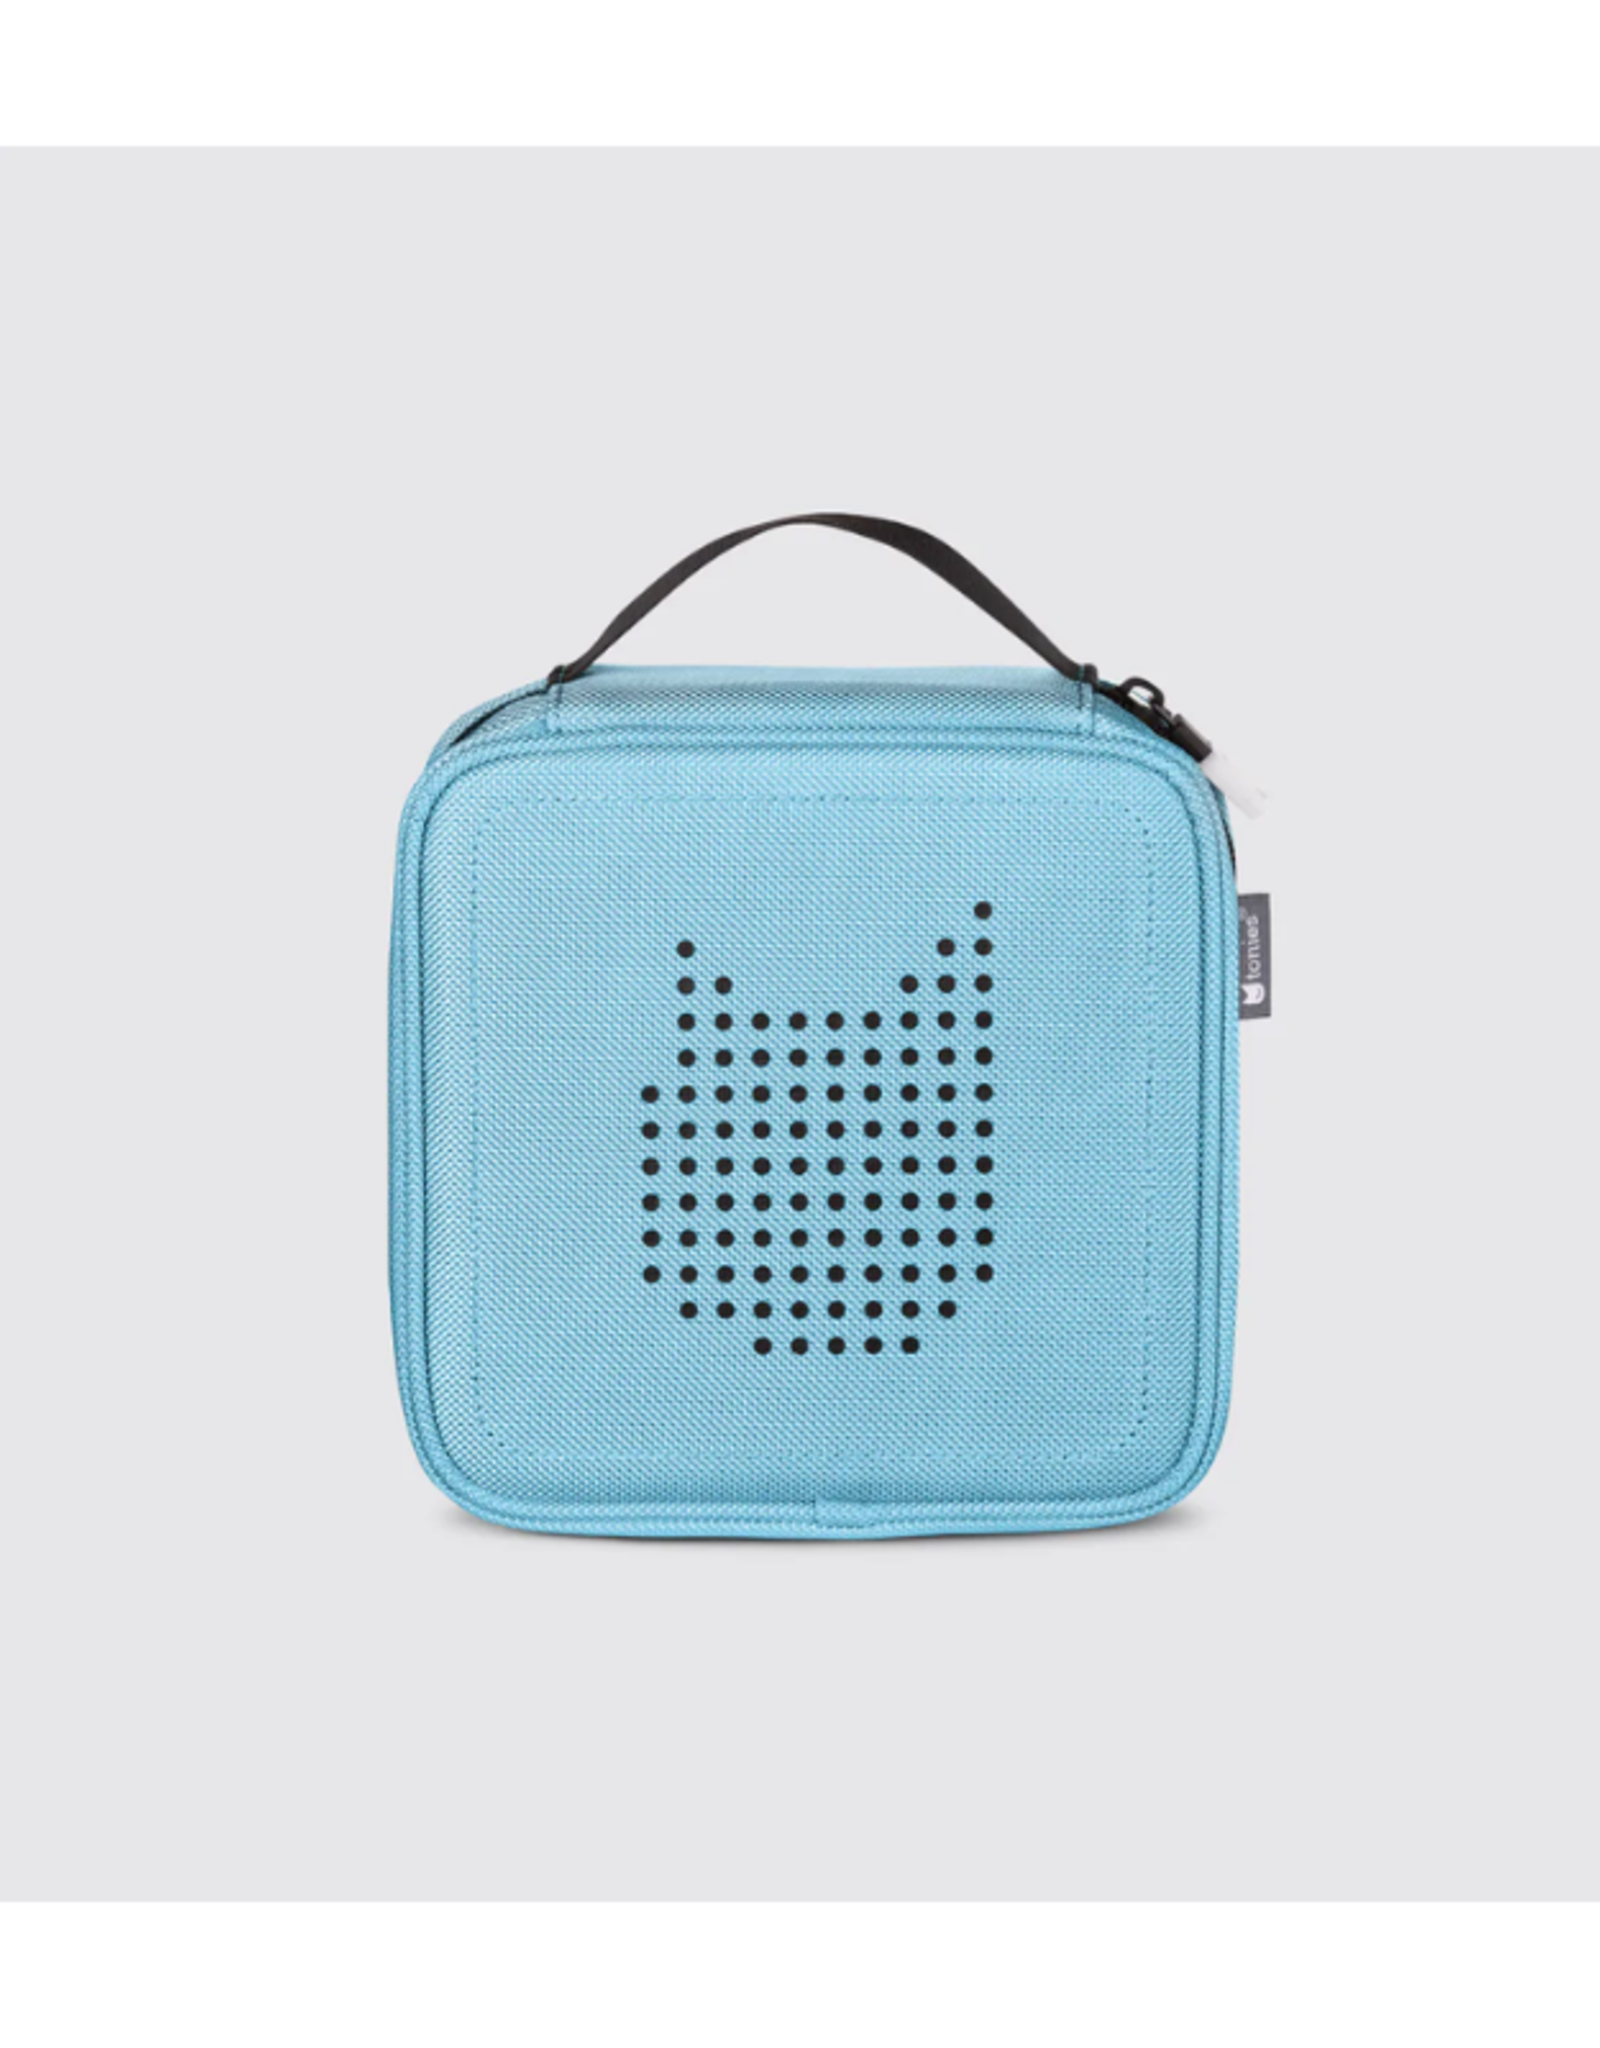 Tonies Tonie Carrying Case - Light Blue